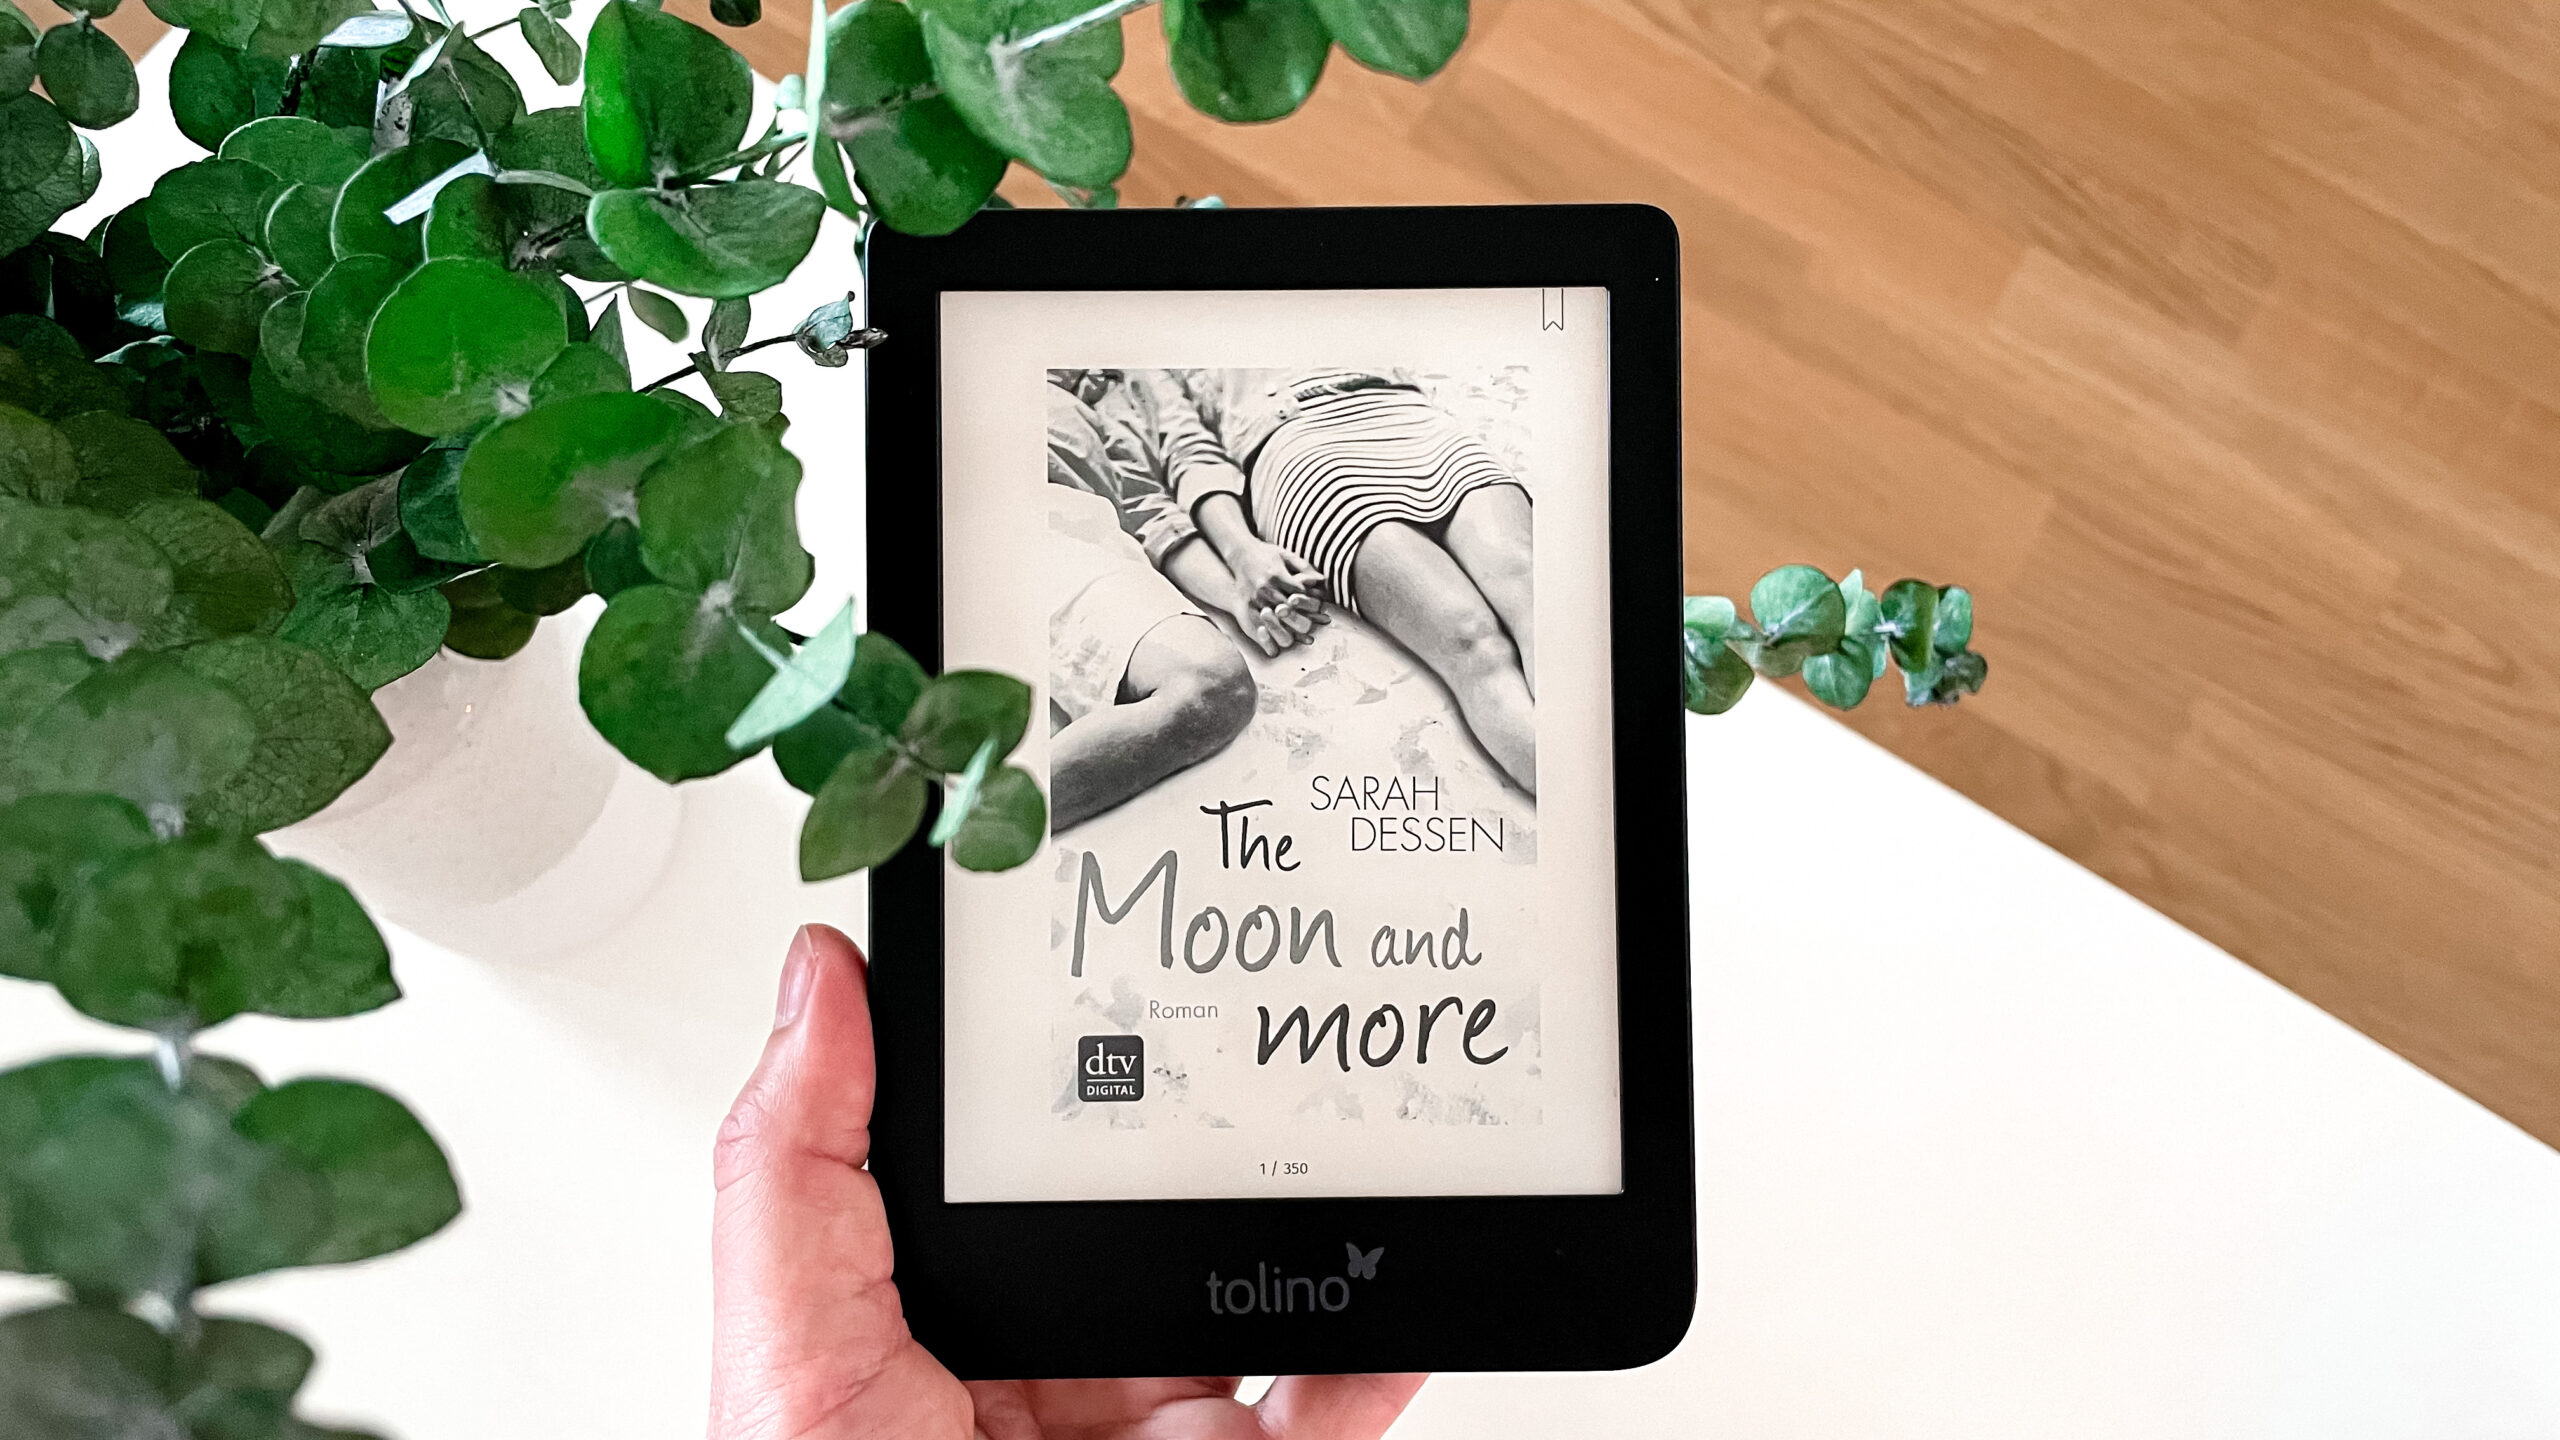 Sarah Dessen: The Moon and more